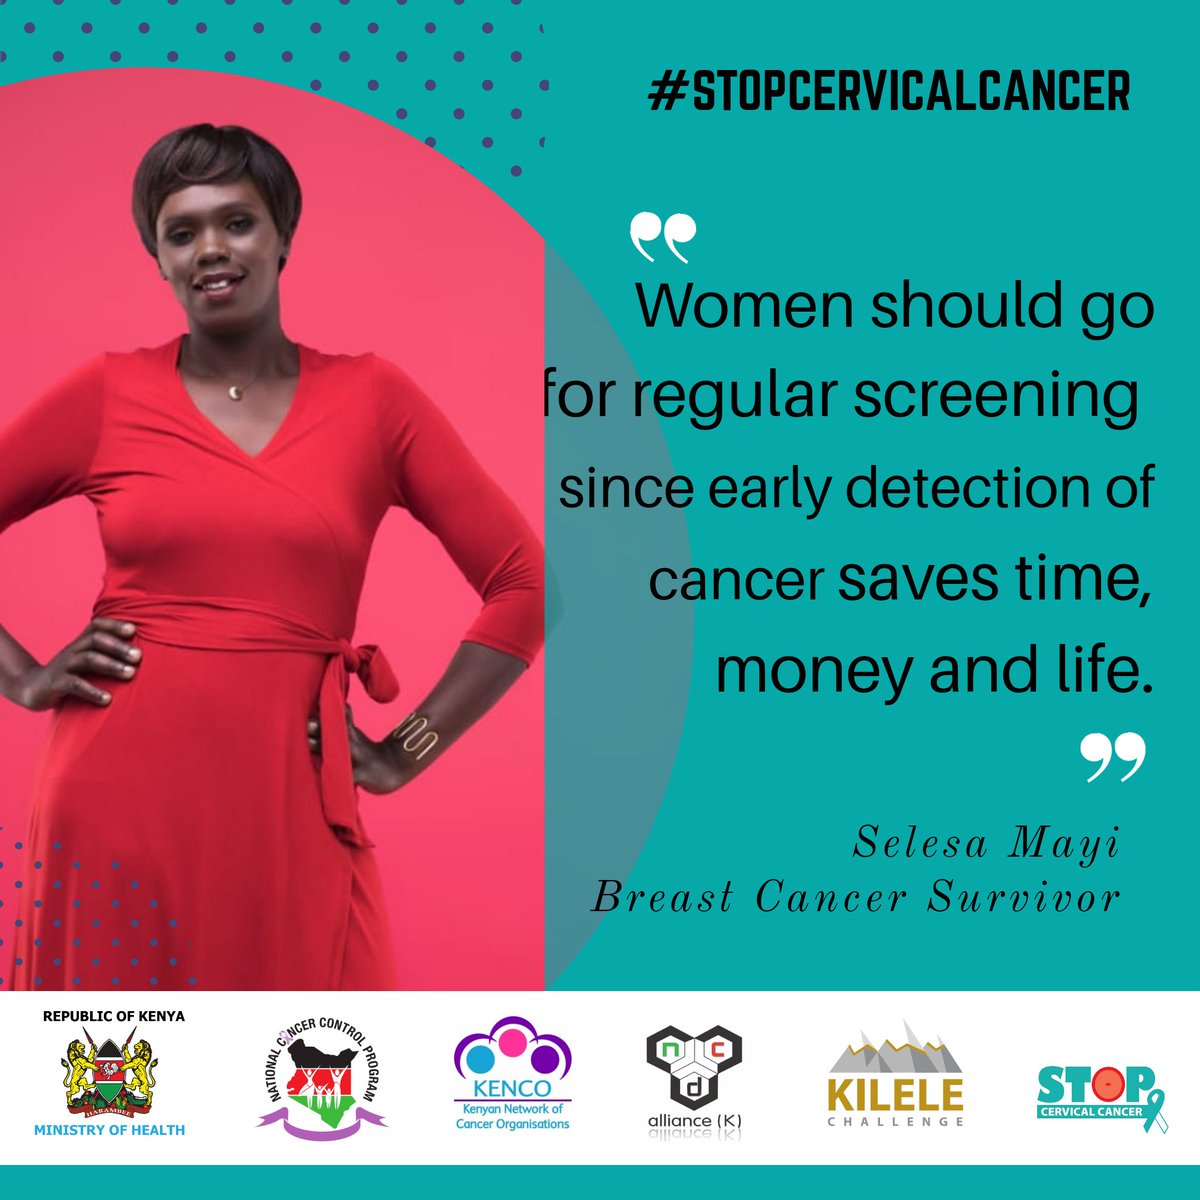 It's #cervicalcancer awareness

Our heroines & hero took time to inspire change. Read & take action.
Blessings
#tuongeencds
#kilelechallenge